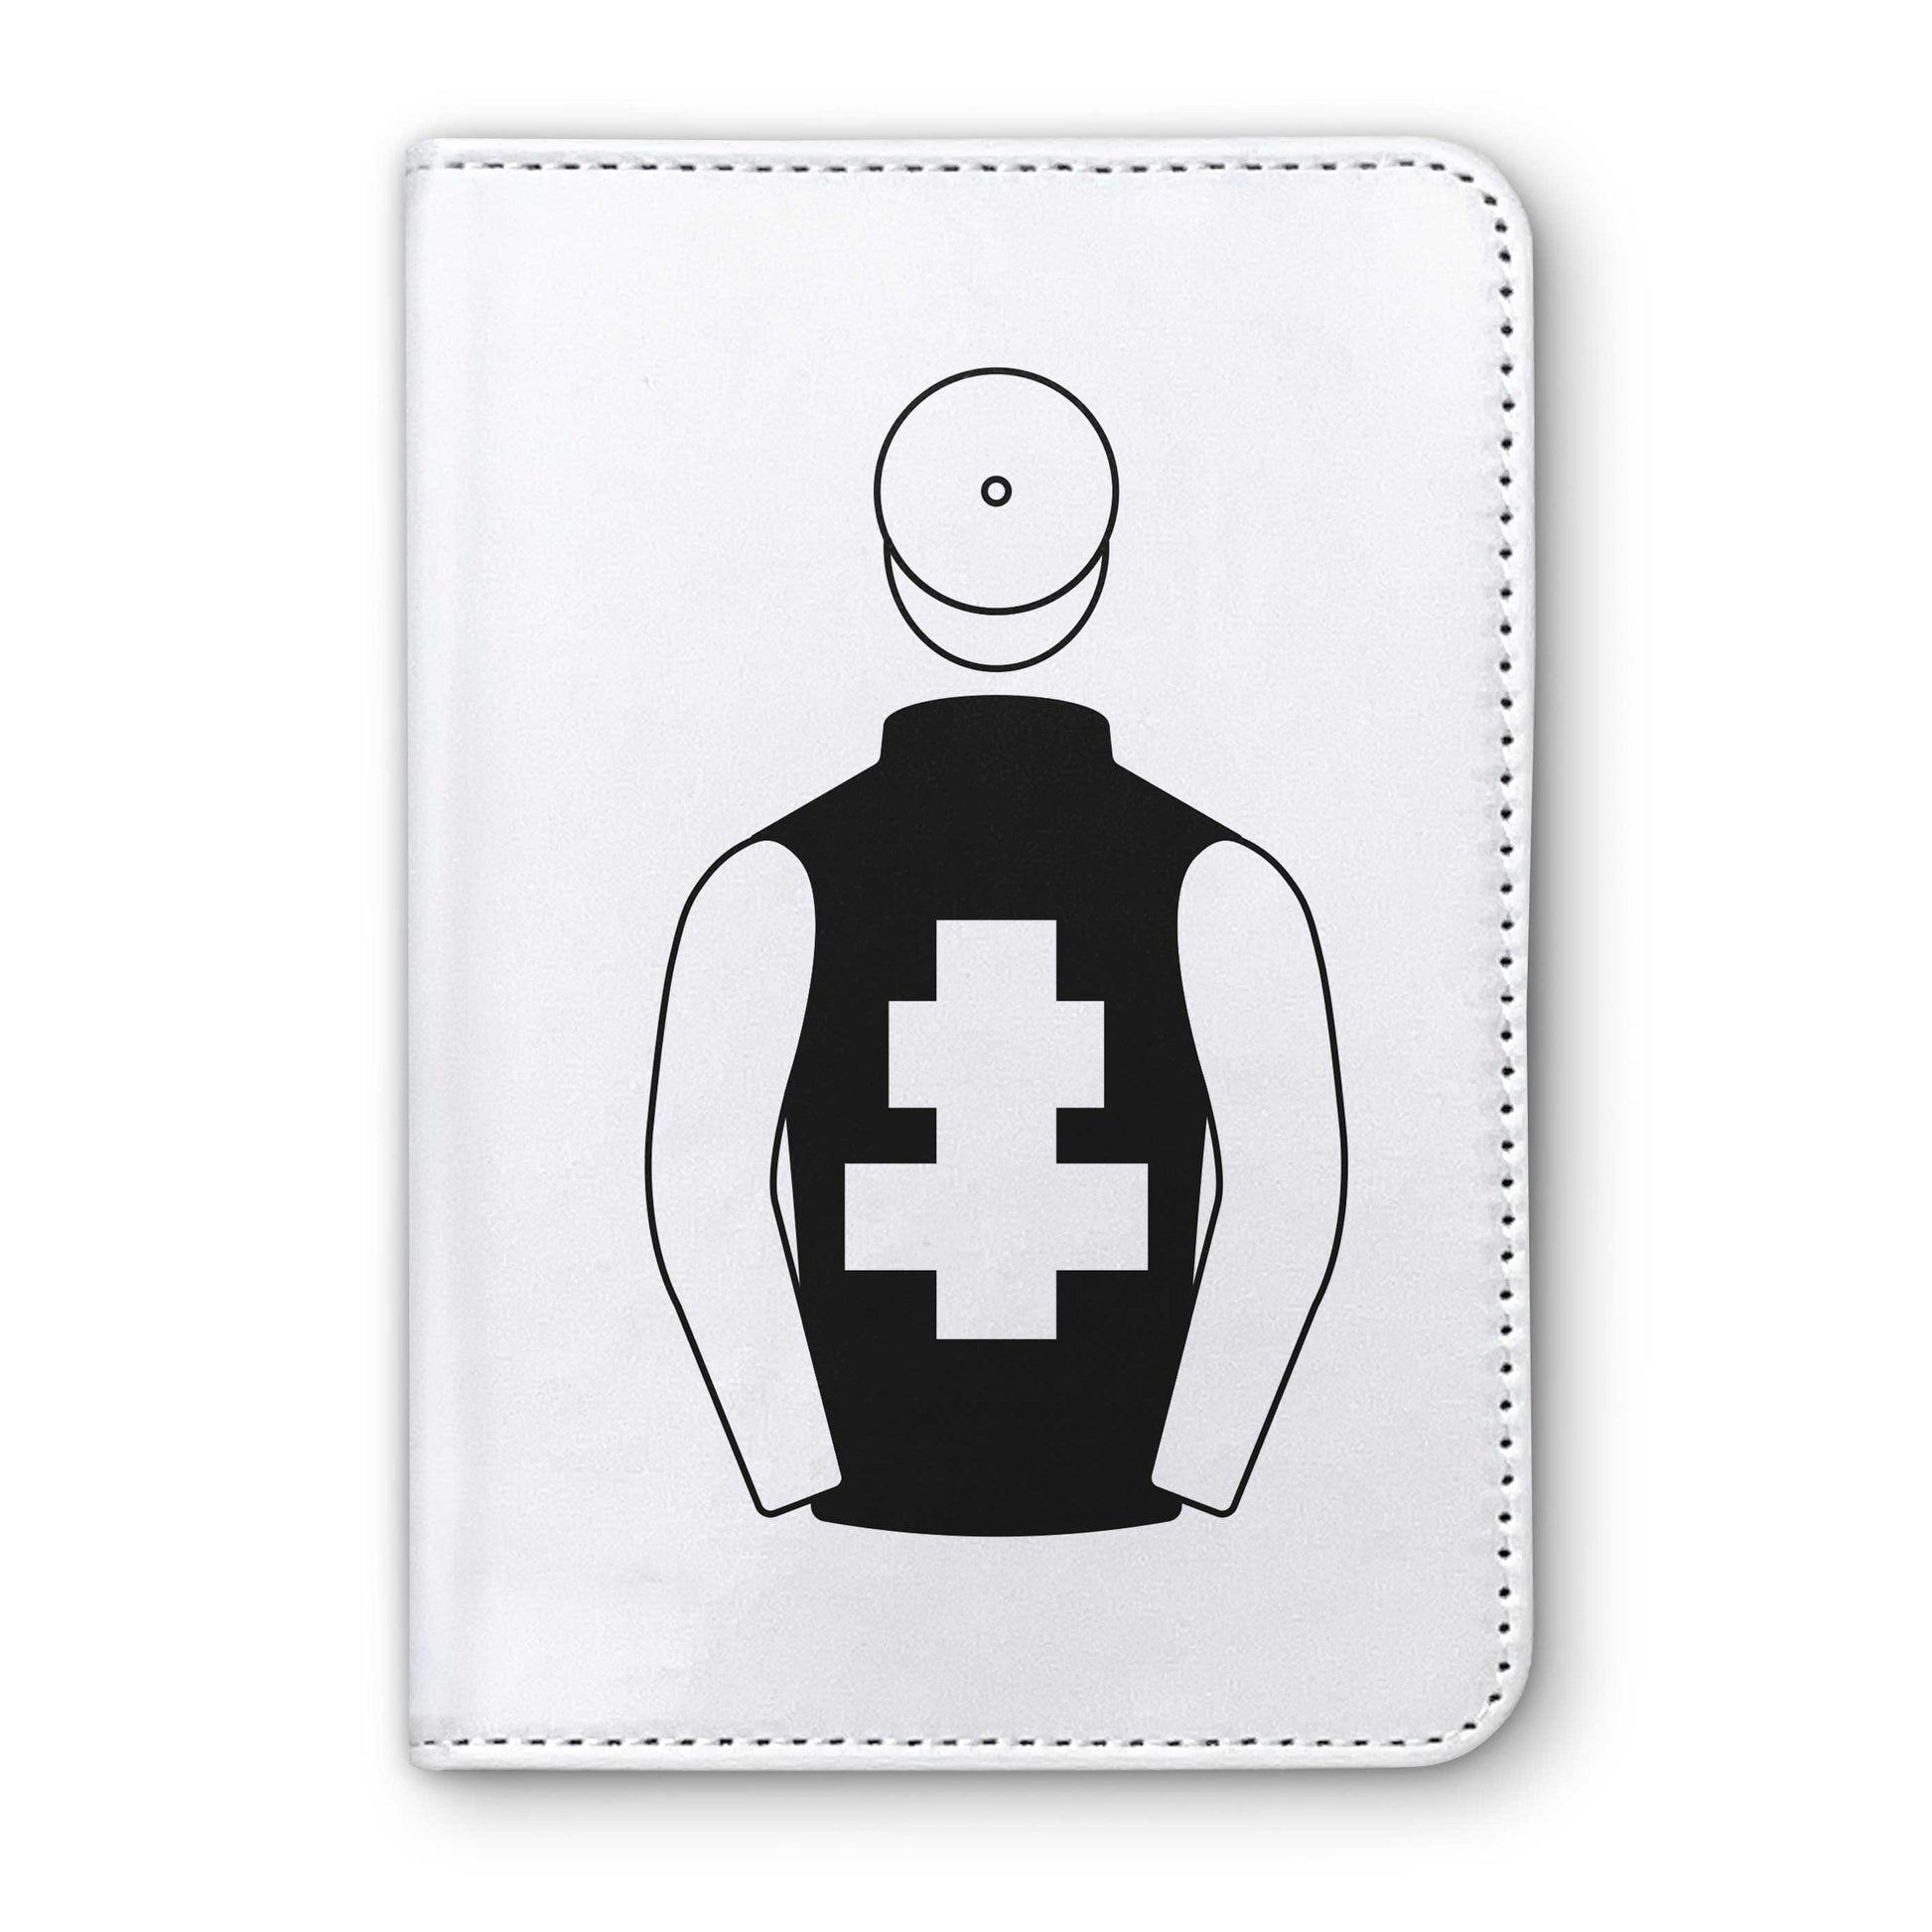 Mike And Eileen Newbould Horse Racing Passport Holder - Hacked Up Horse Racing Gifts